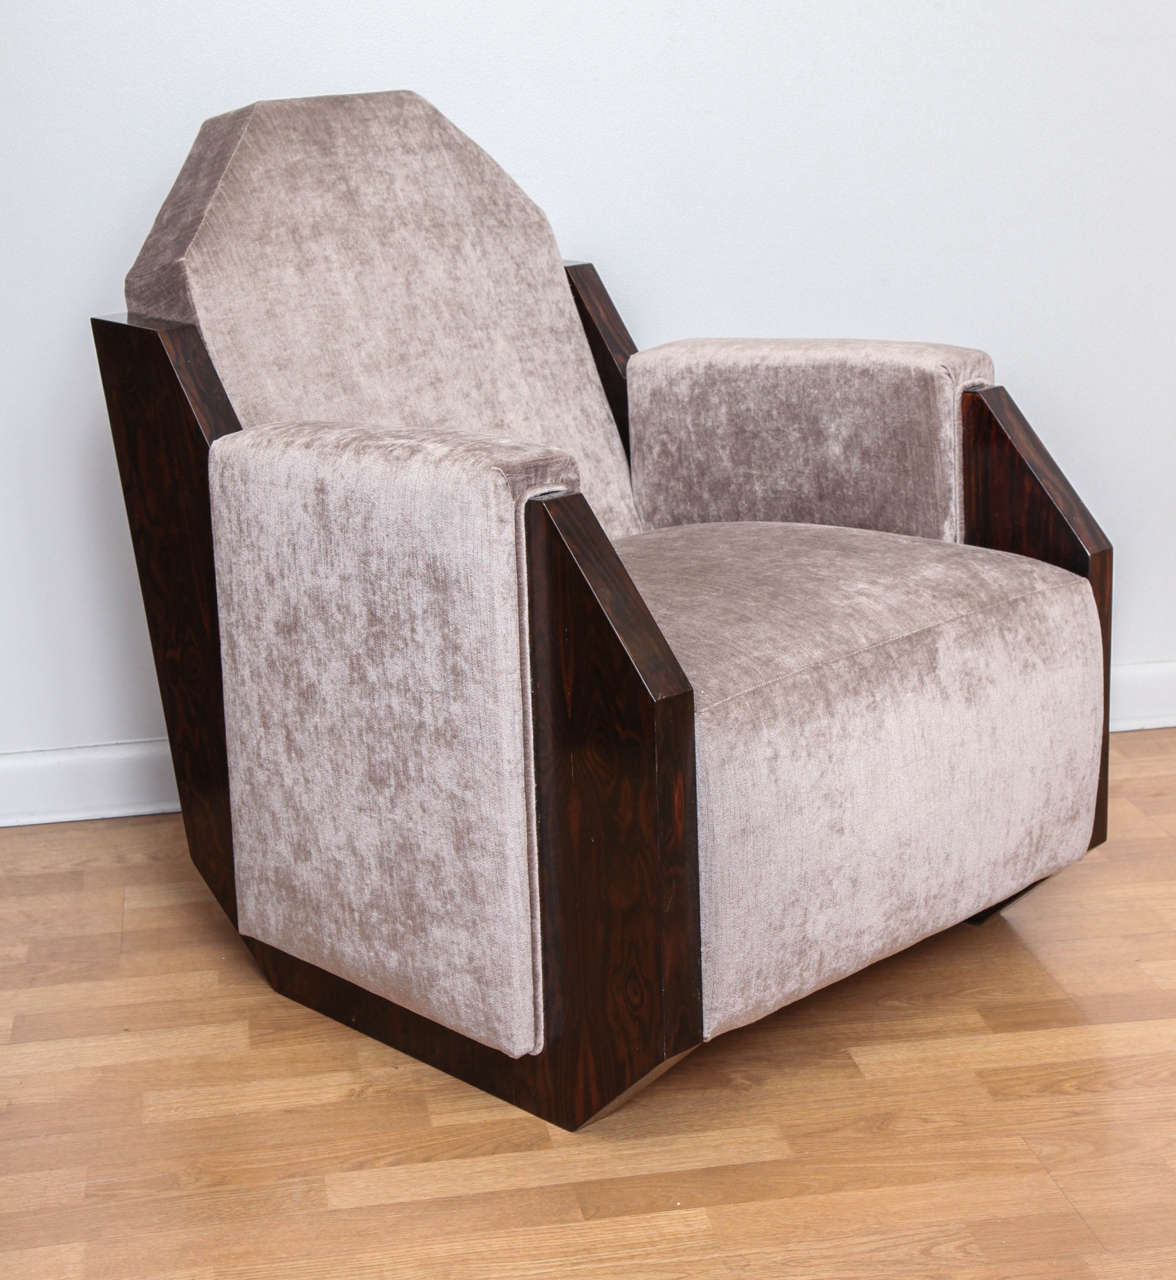 Elegant pair of Art Deco armchairs in the manner of Andre Sornay. Ziricote wood with cotton/silk velvet upholstery.